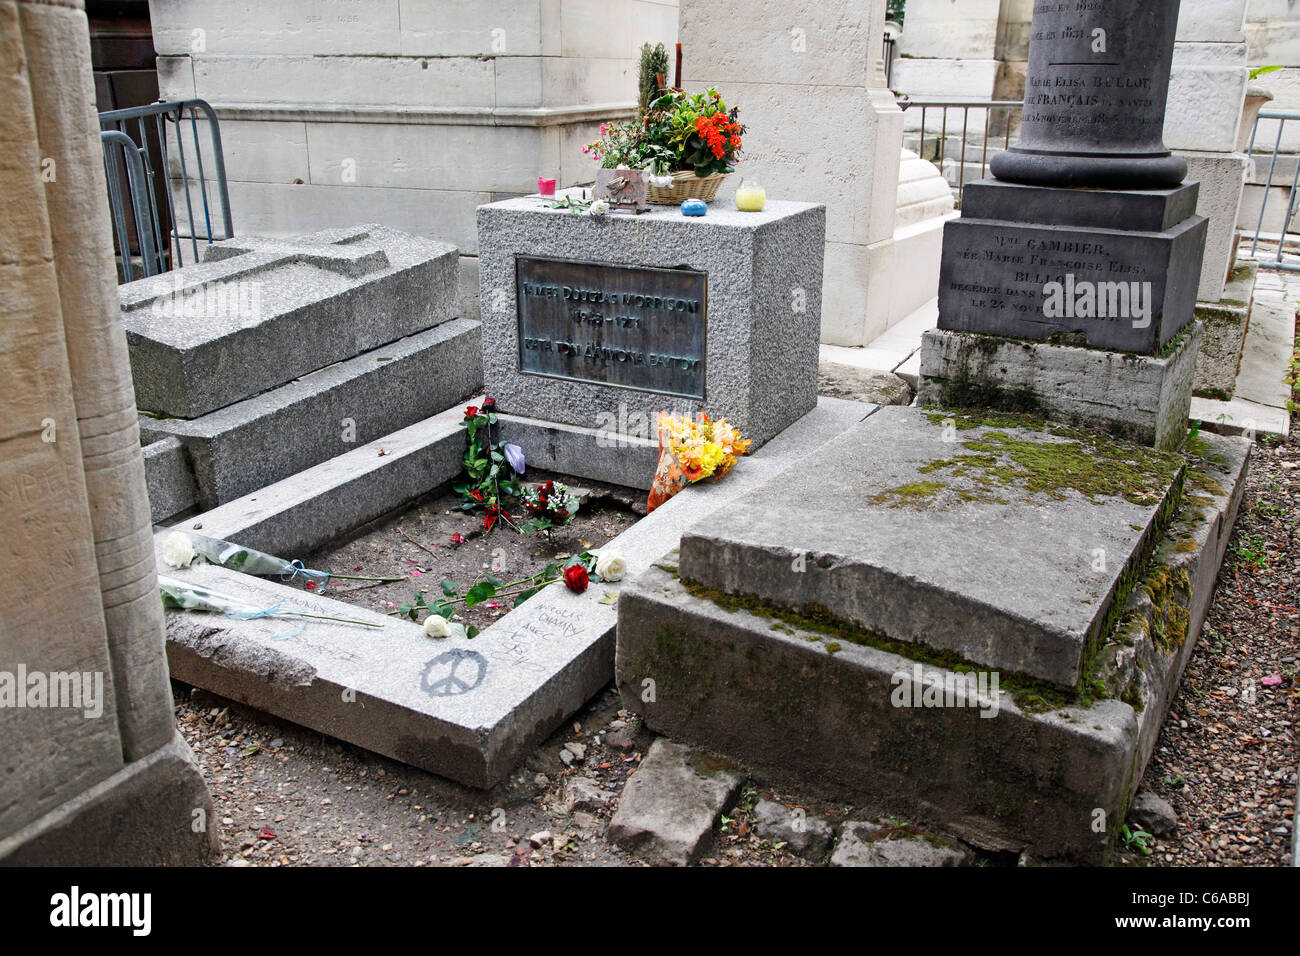 Grave of Jim Morrison of the Doors at Pere Lachaise cemetery in Paris, France Stock Photo